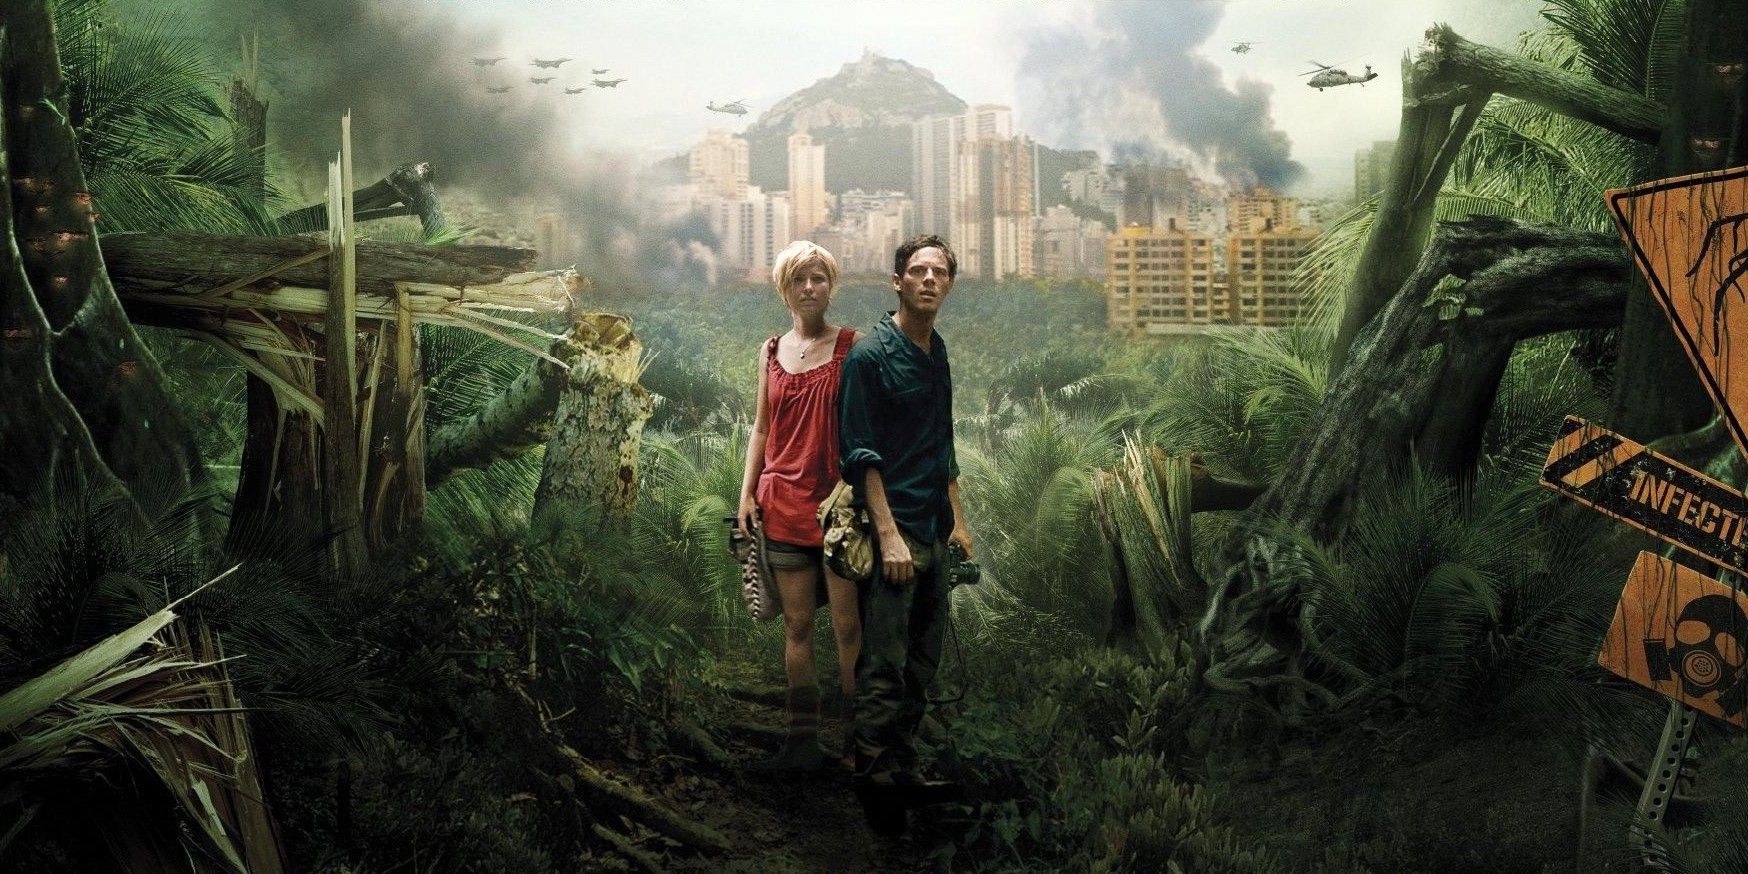 Andrew and Samantha in a jungle in Monsters.